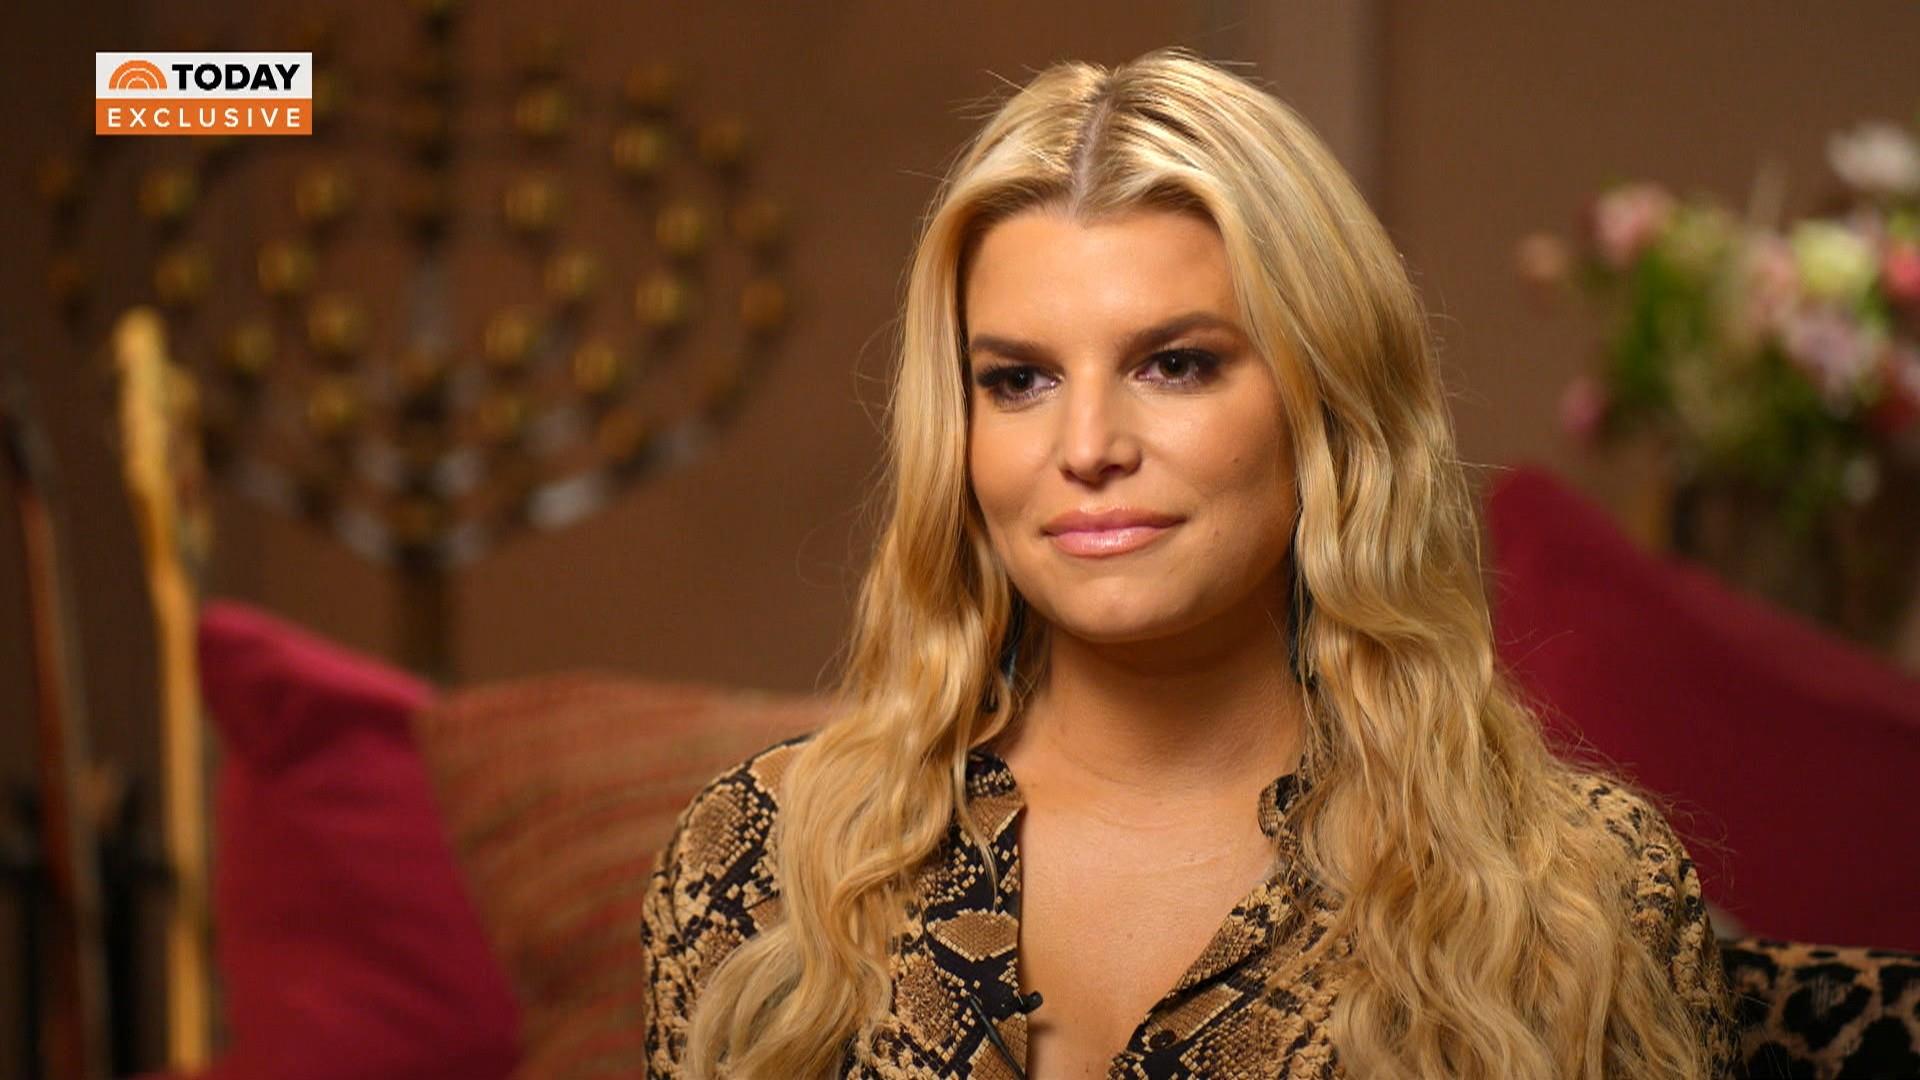 Jessica Simpson speaks out about her alcoholism, relationships, childhood  abuse